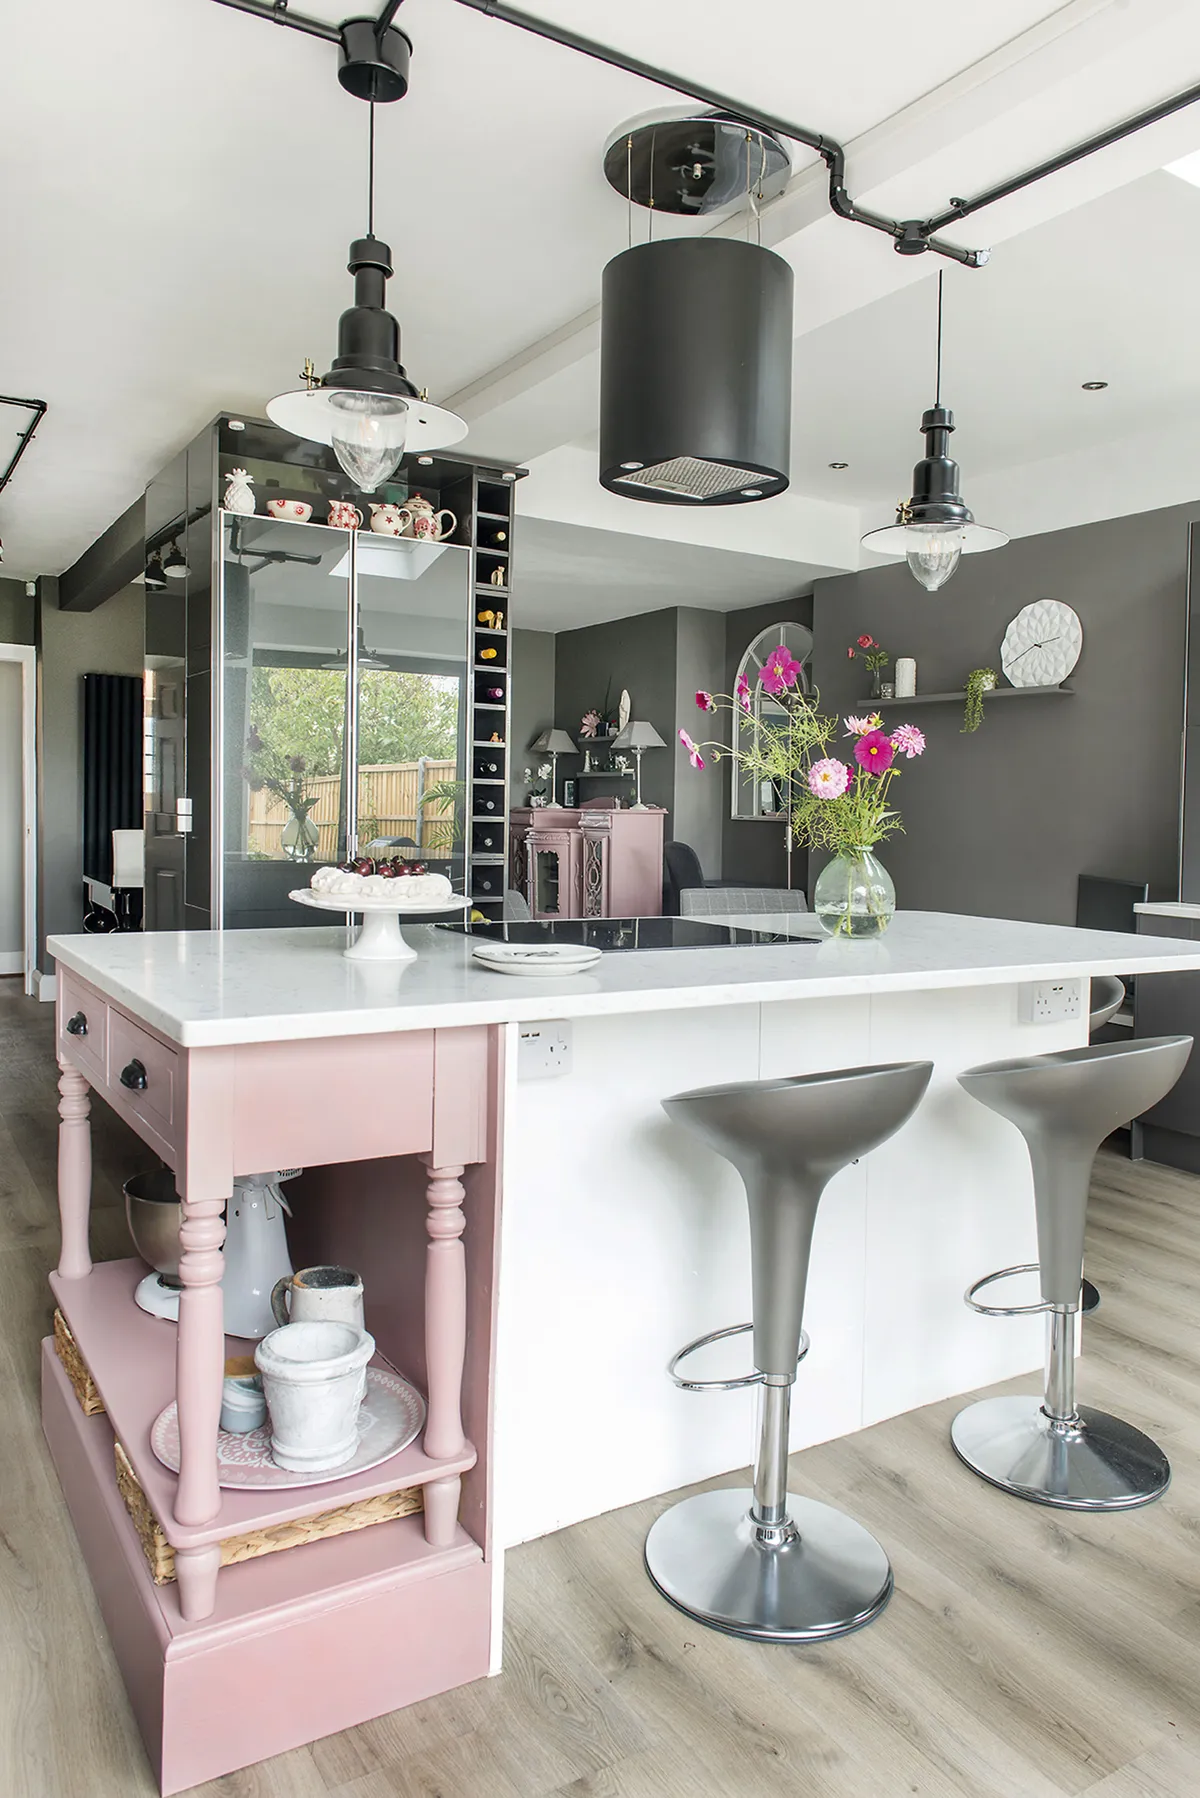 Sarah has softened her modern scheme with splashes of baby pink, including an upcycled console table, which she’s painted in Farrow & Ball’s Sulking Room Pink and built into the island unit, styled with Bombo stools from John Lewis